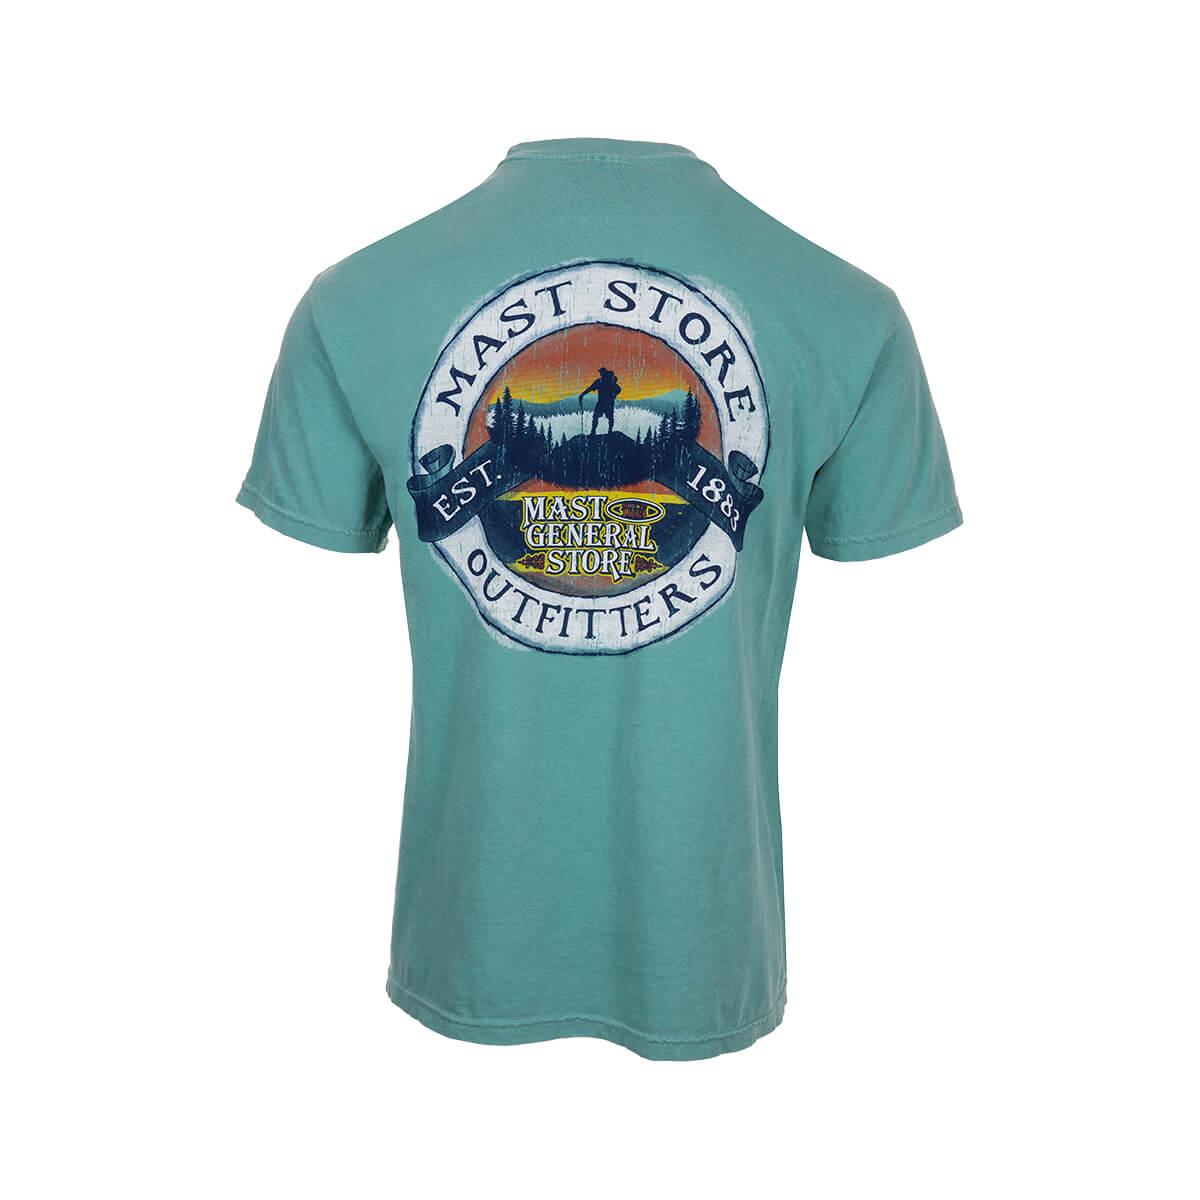  Mast Store Outfitters Mountain Hiker Short Sleeve T- Shirt